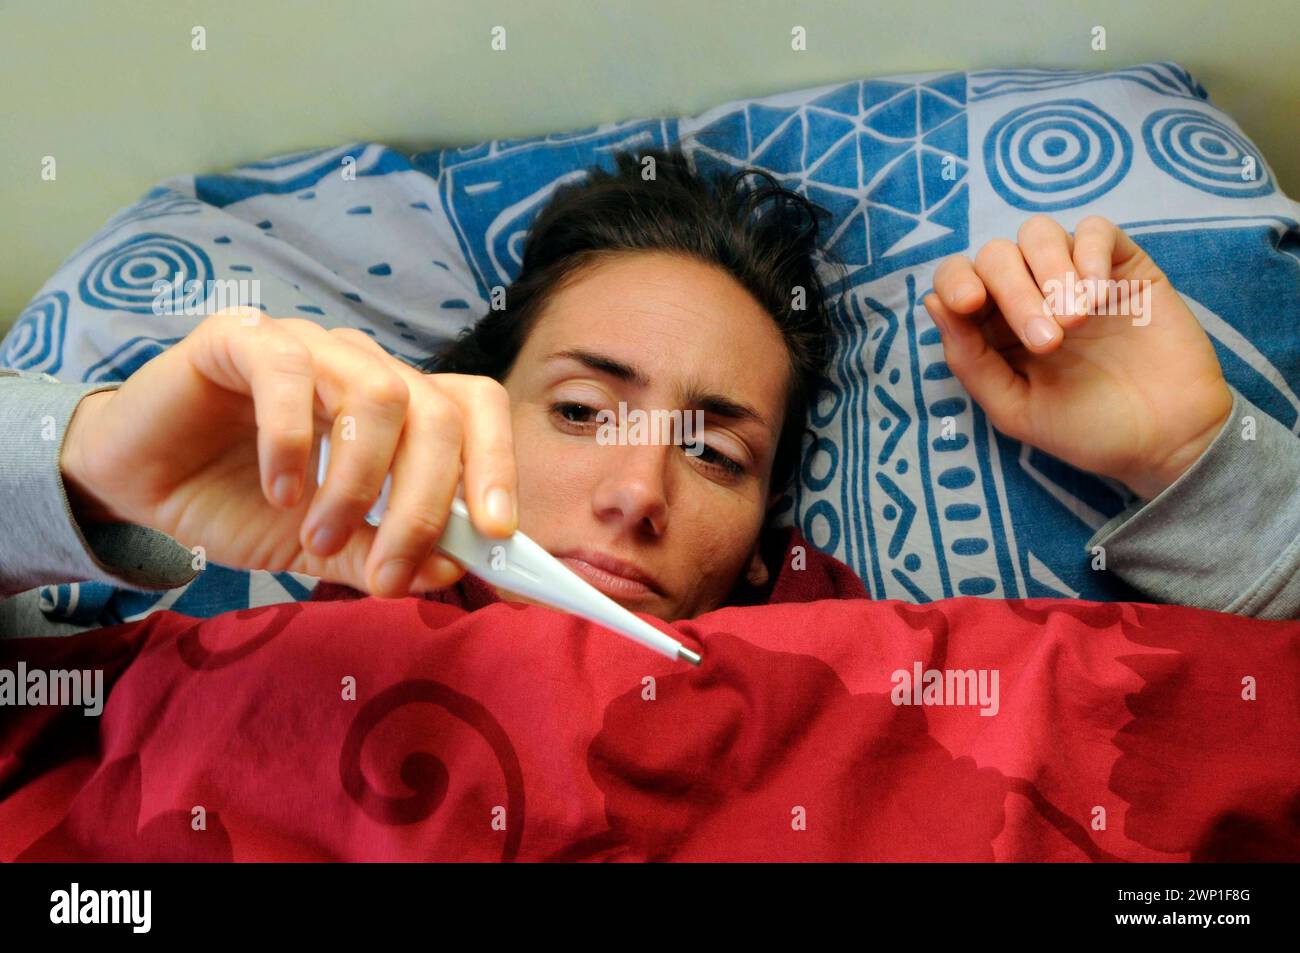 bed rest with a flu and fever, curing an illness bed rest with a flu and fever Stock Photo